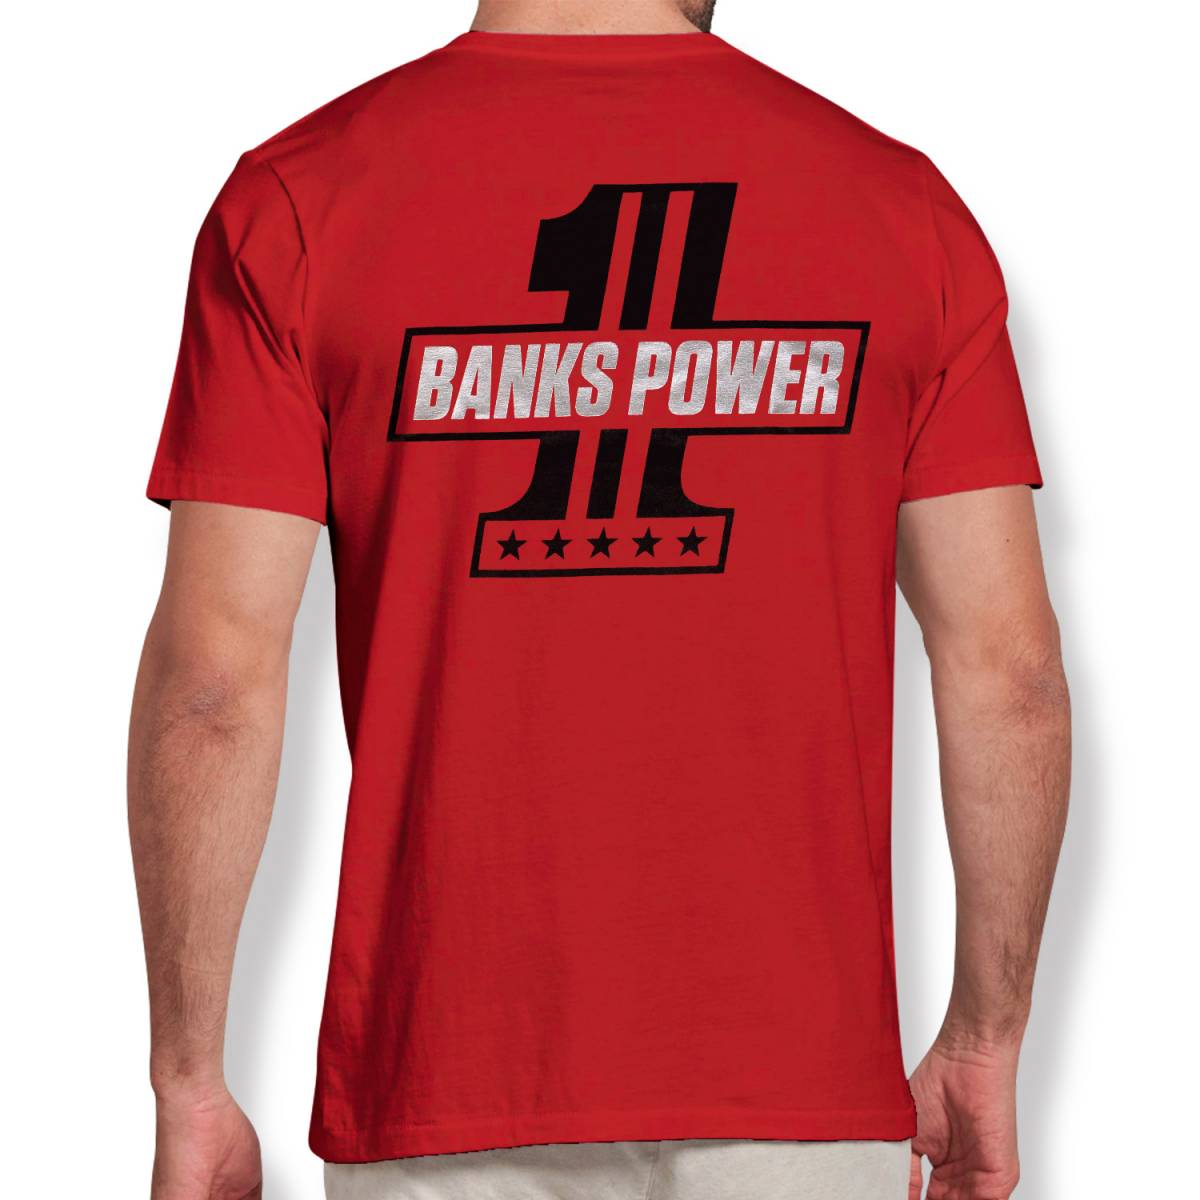 Banks One T Shirt Rear Graphic 96283